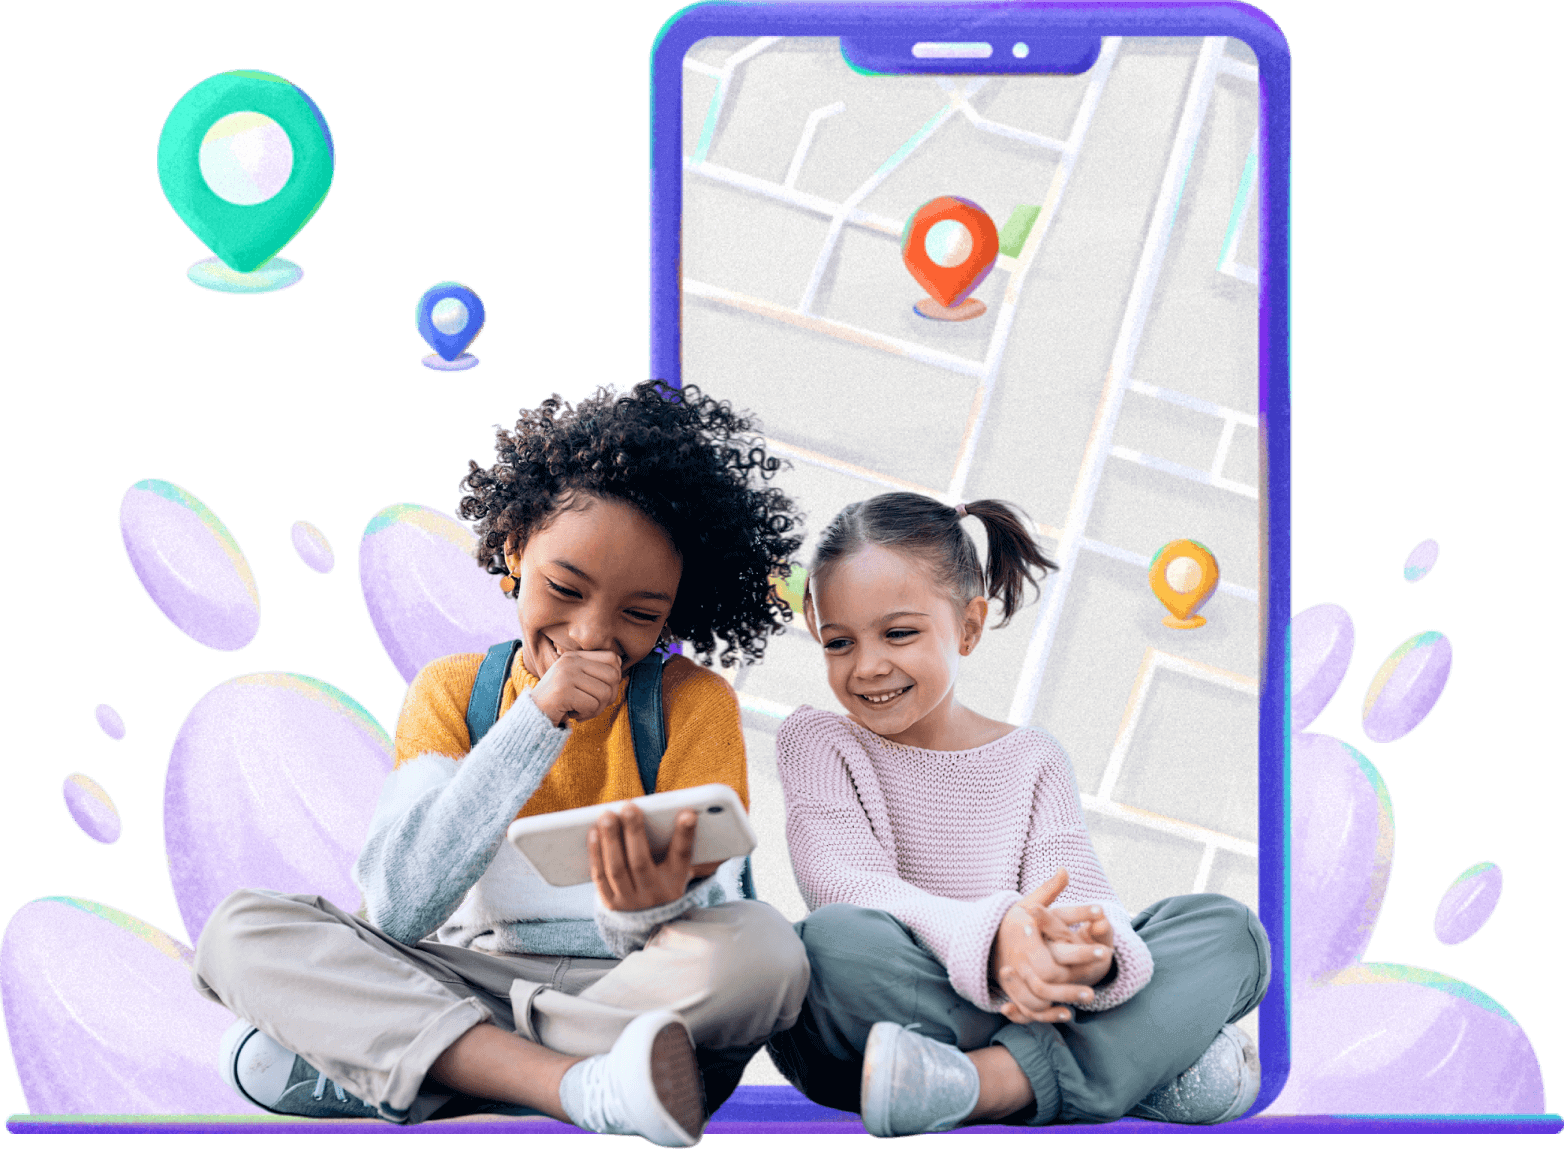 What is the best way to keep an eye on your children's location?